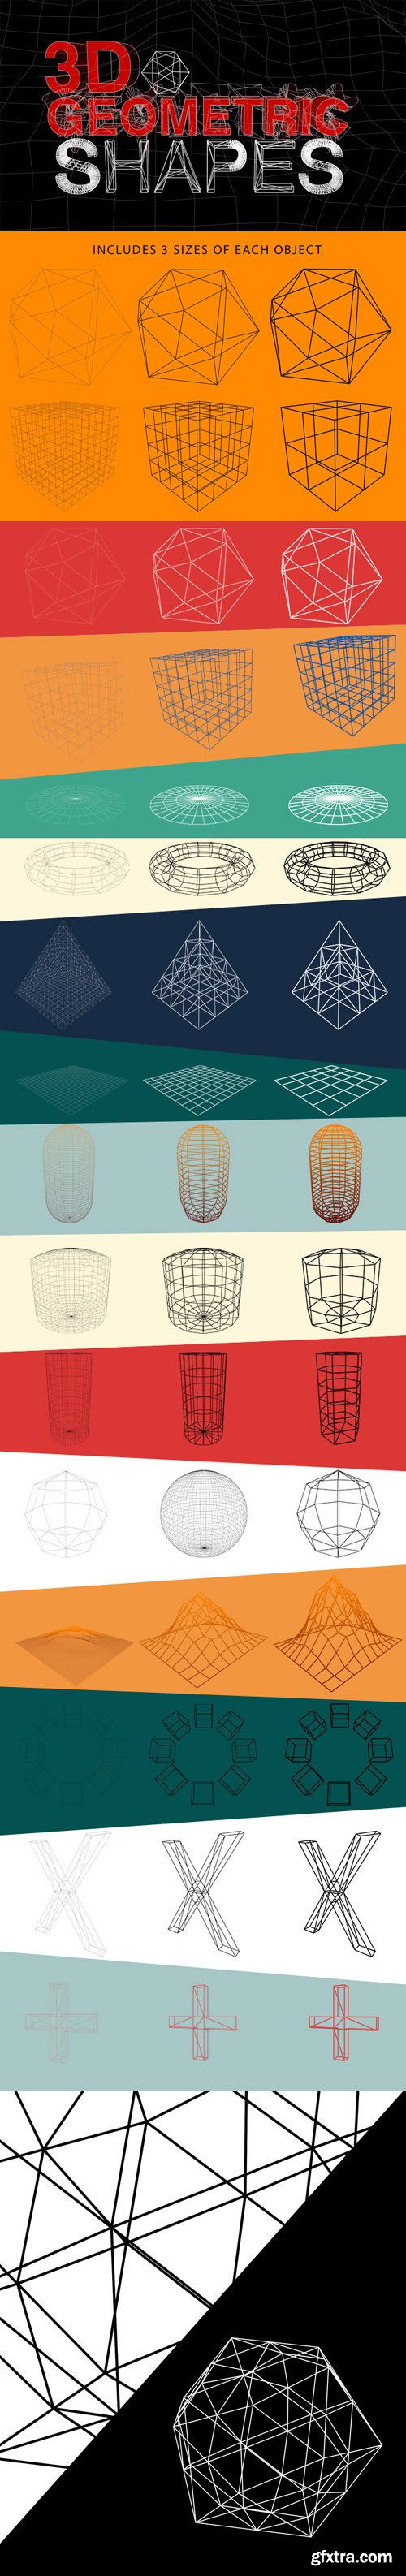 3D Geometric Shapes - Outlines  Wireframes